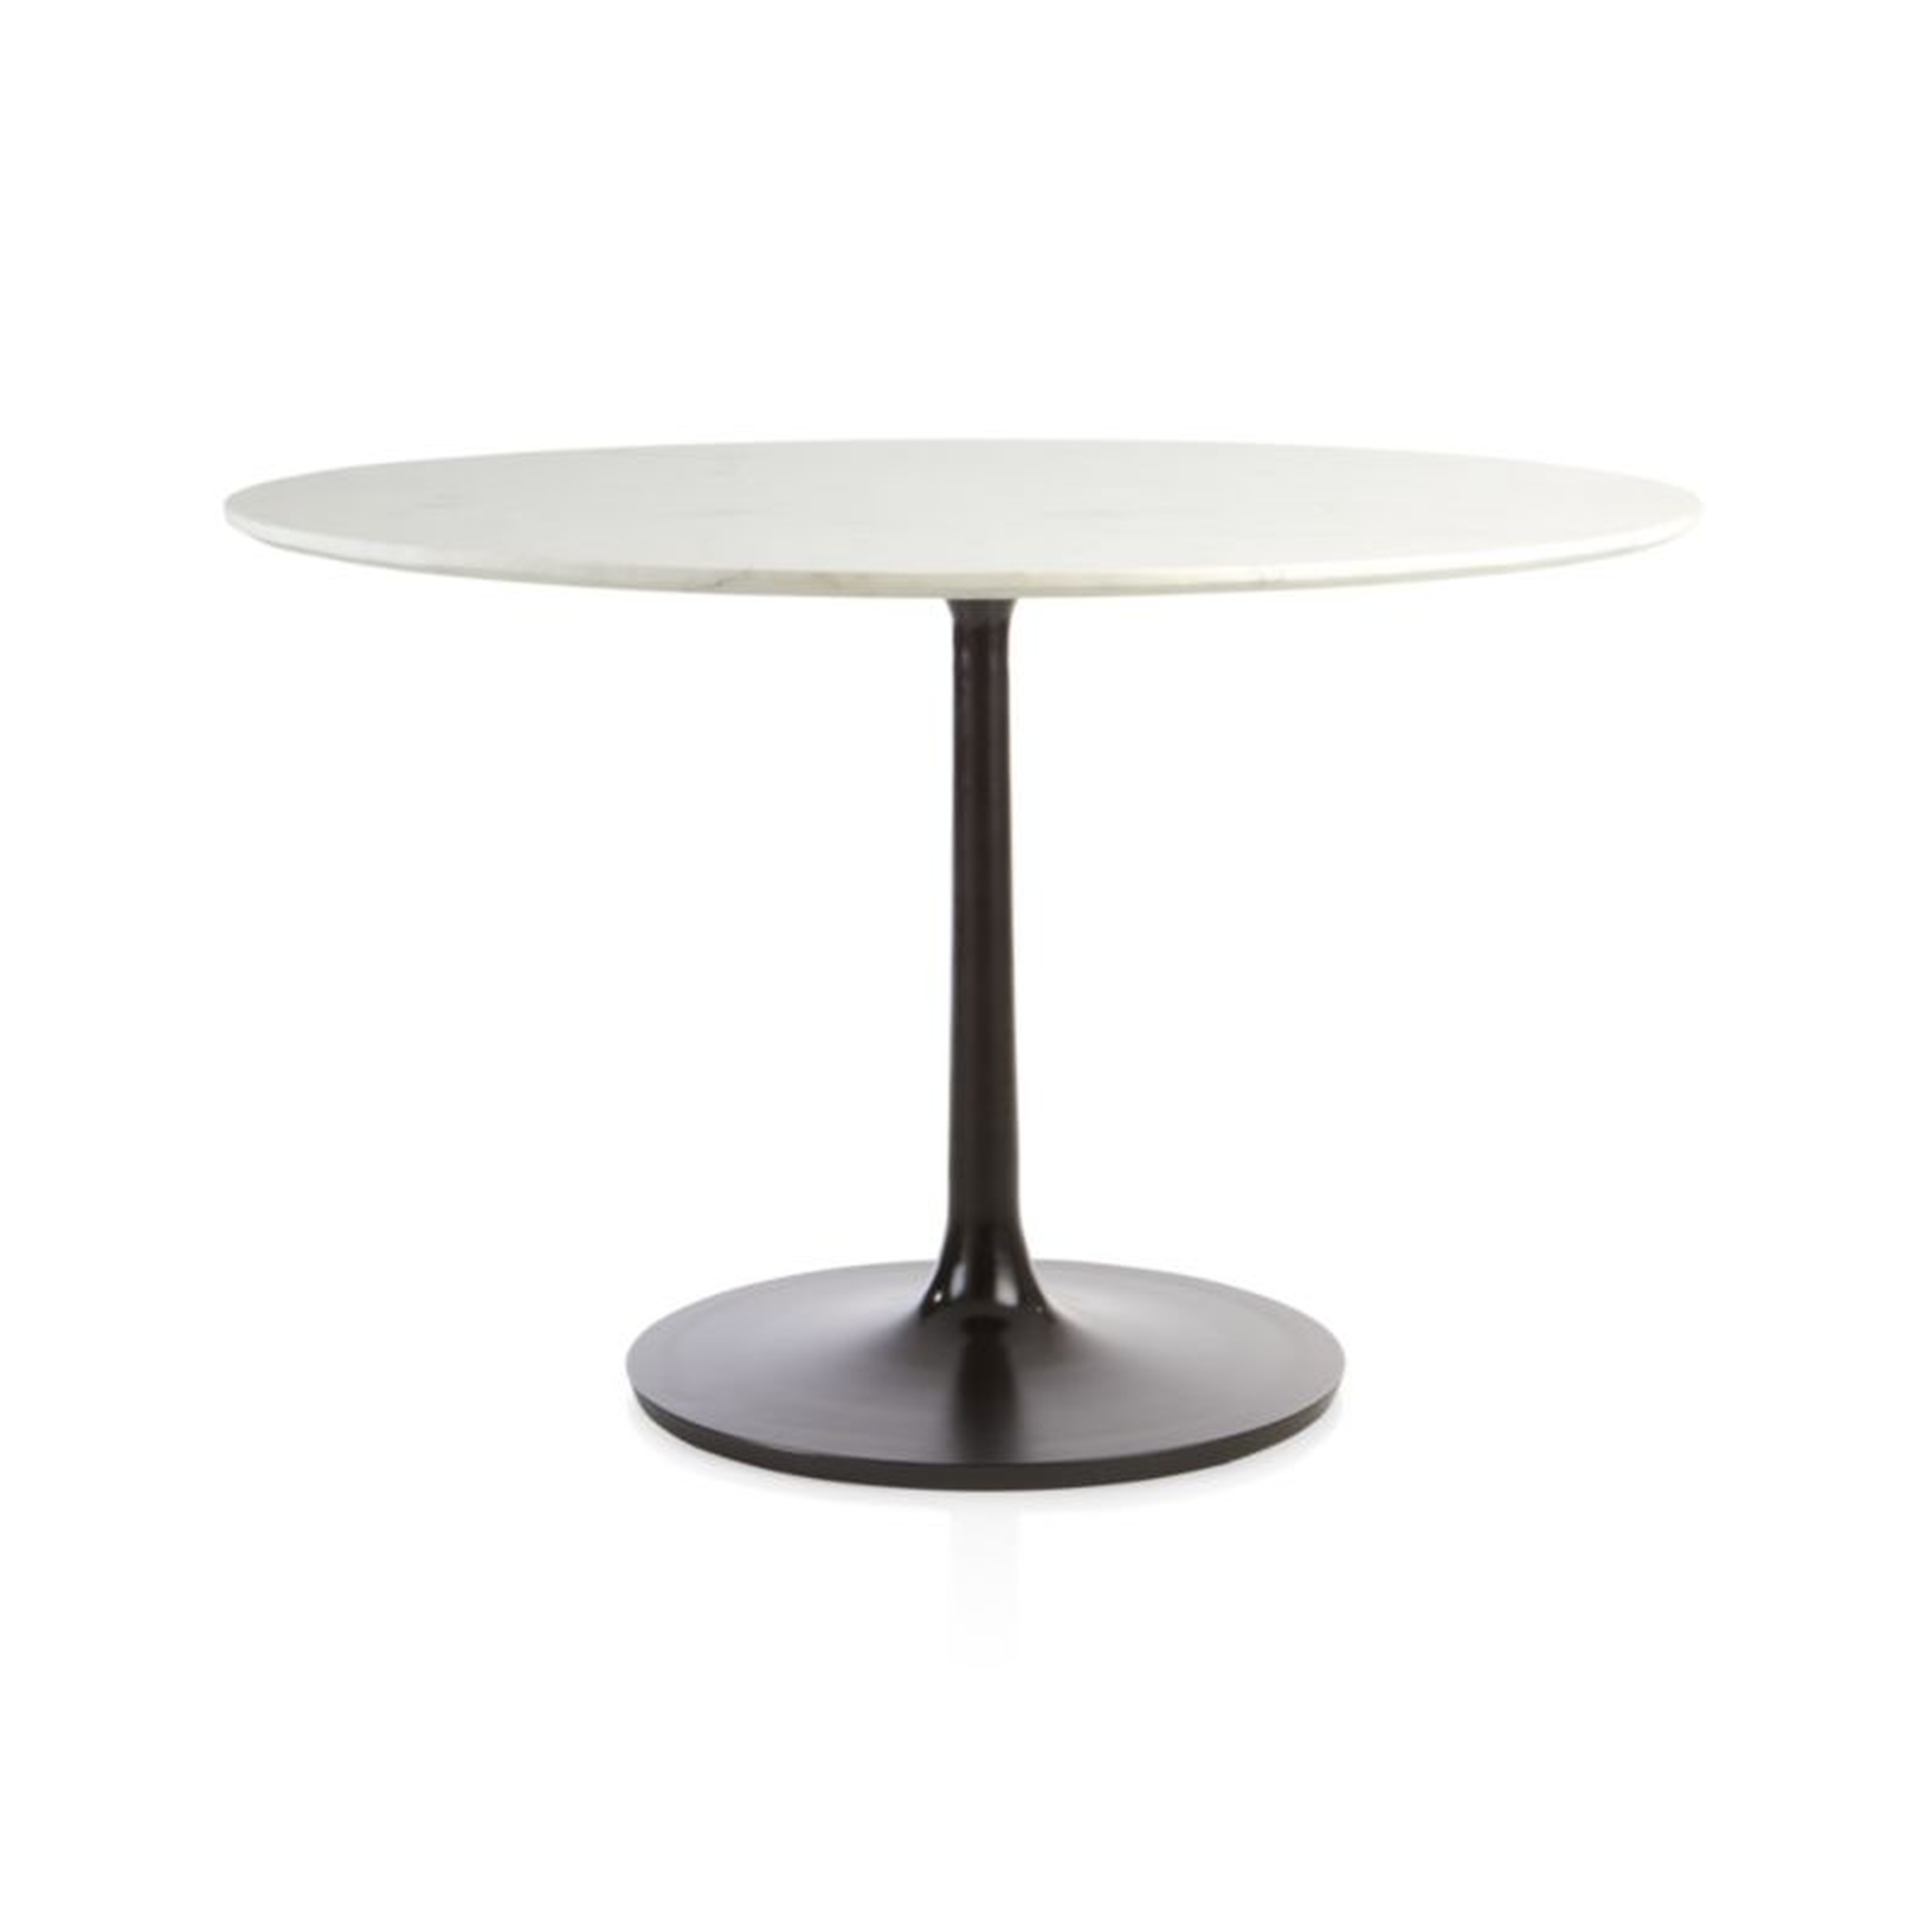 Nero 48" White Marble Dining Table with Matte Black Base - Crate and Barrel